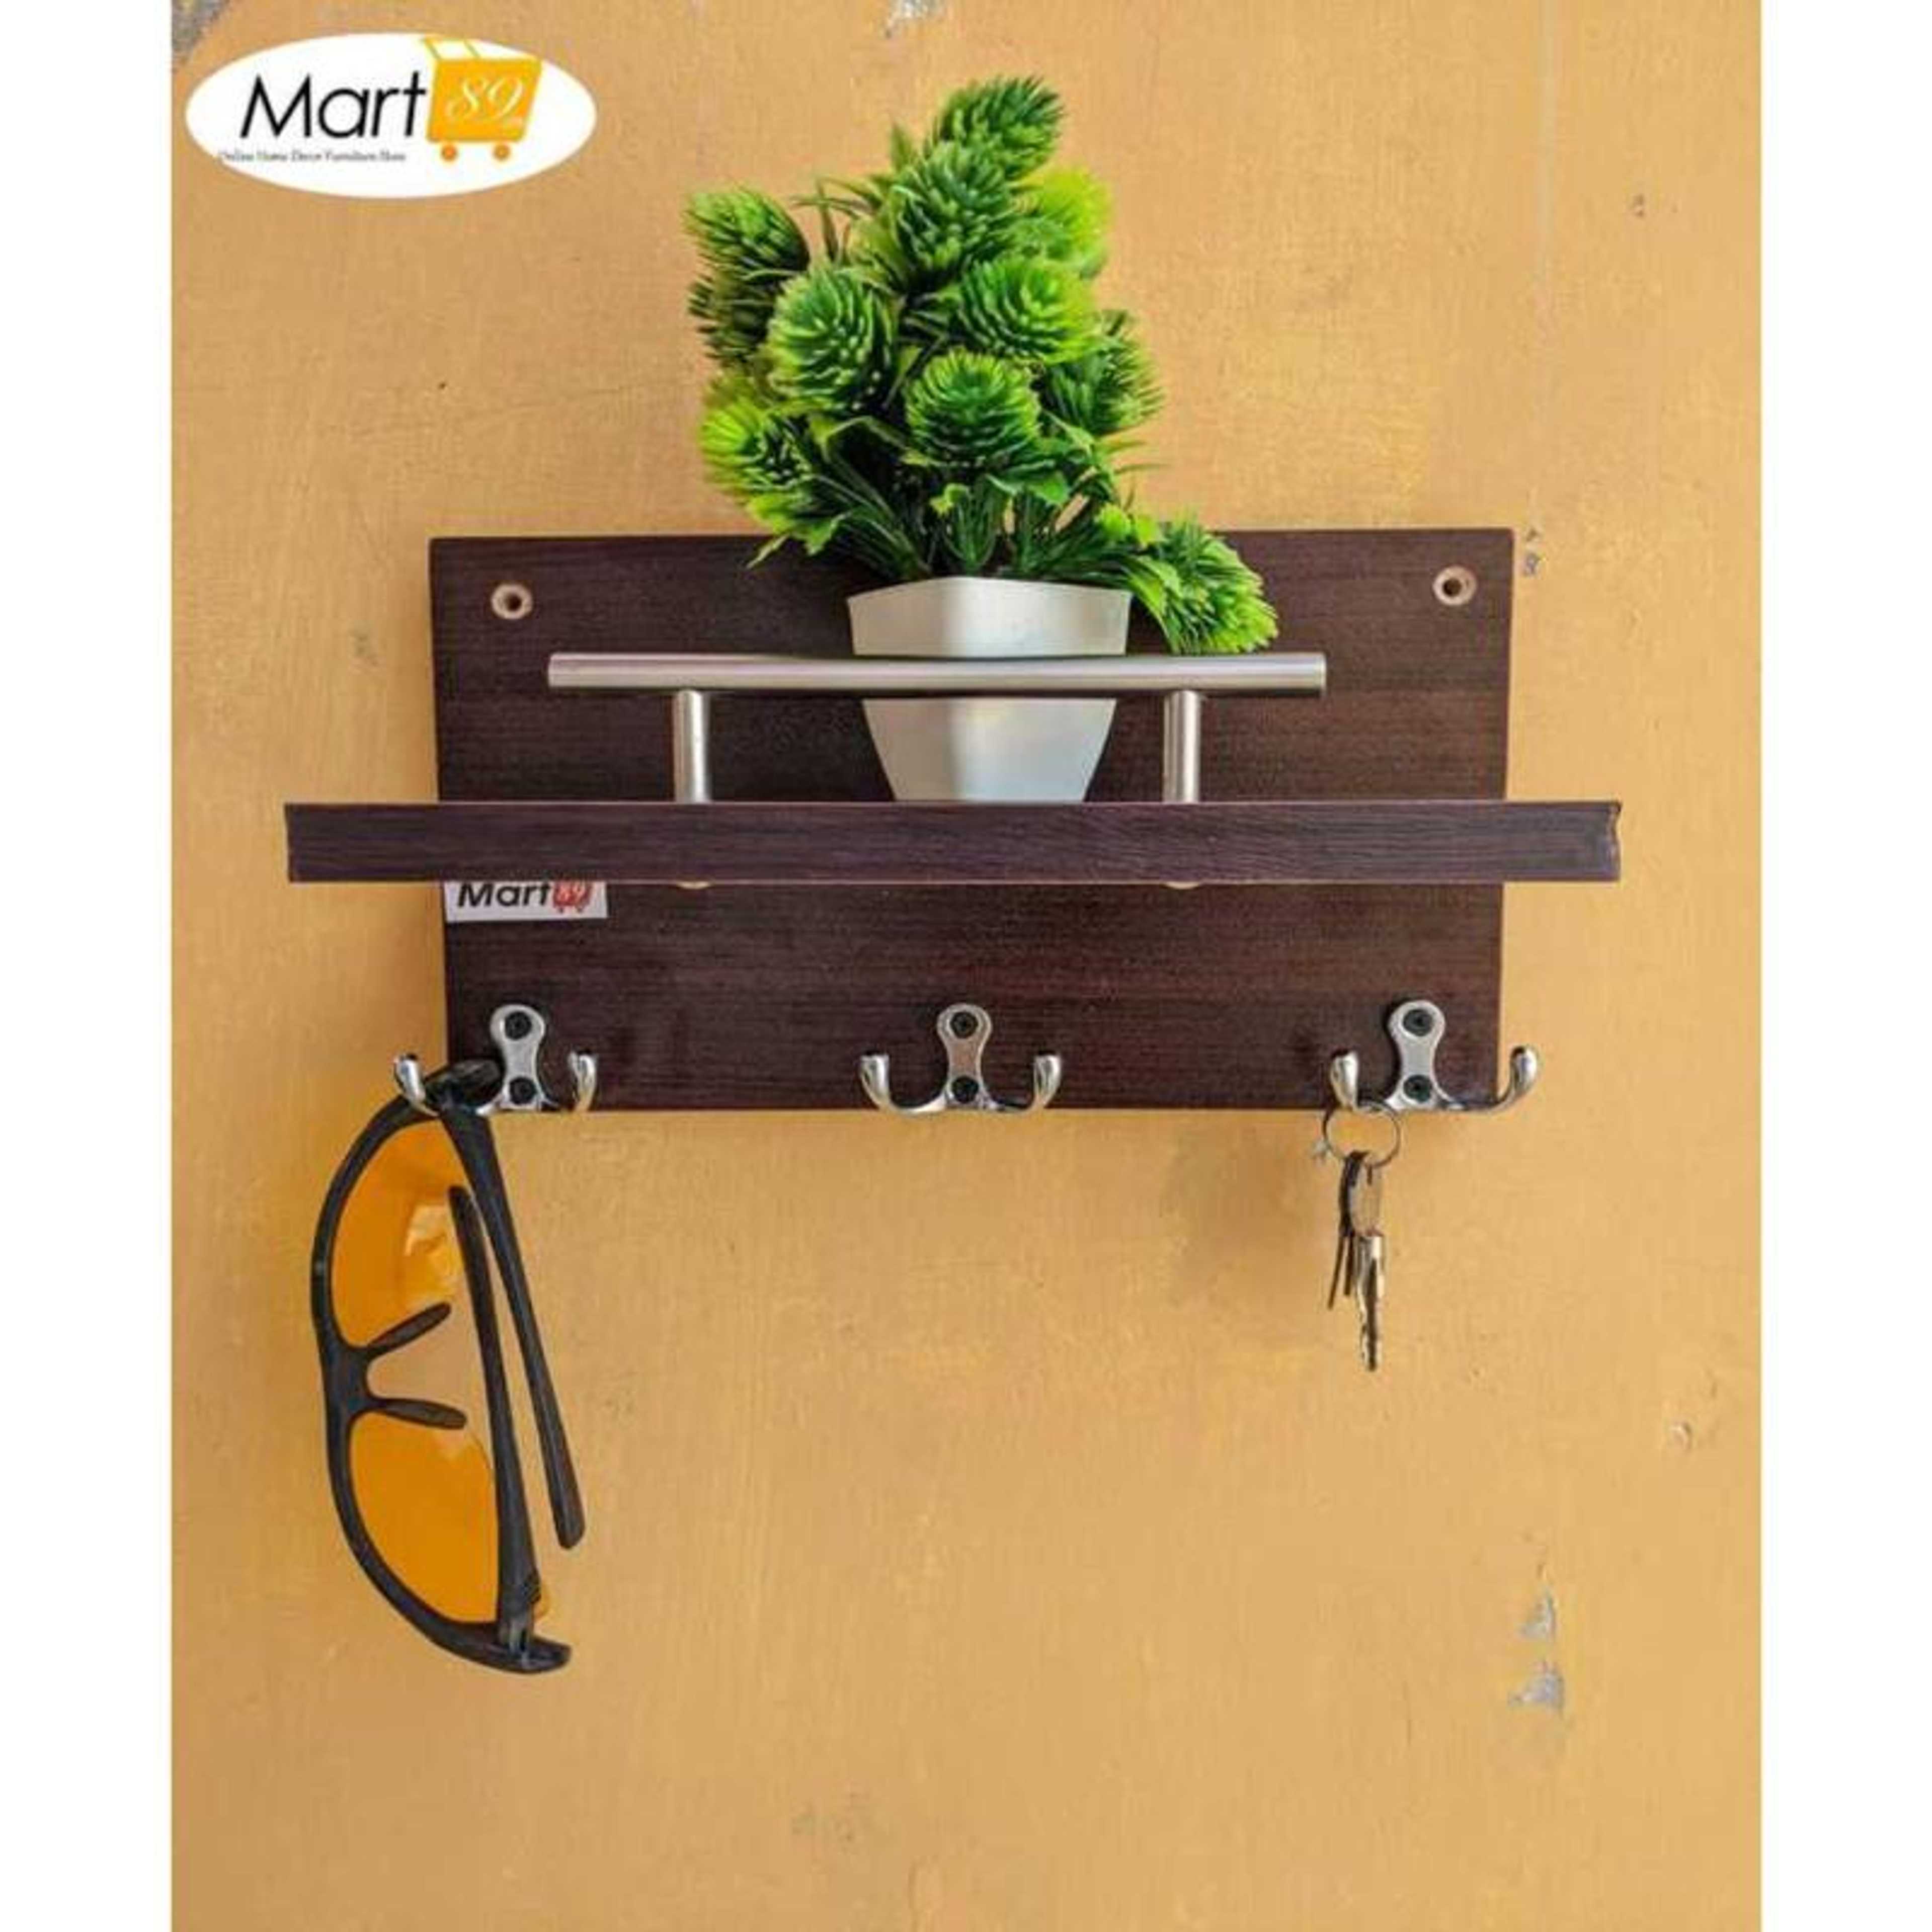 Key Holder Key rack Stand for Wall Office & Home Decorative Antique Design no 080 Official Mart89 Branded Product